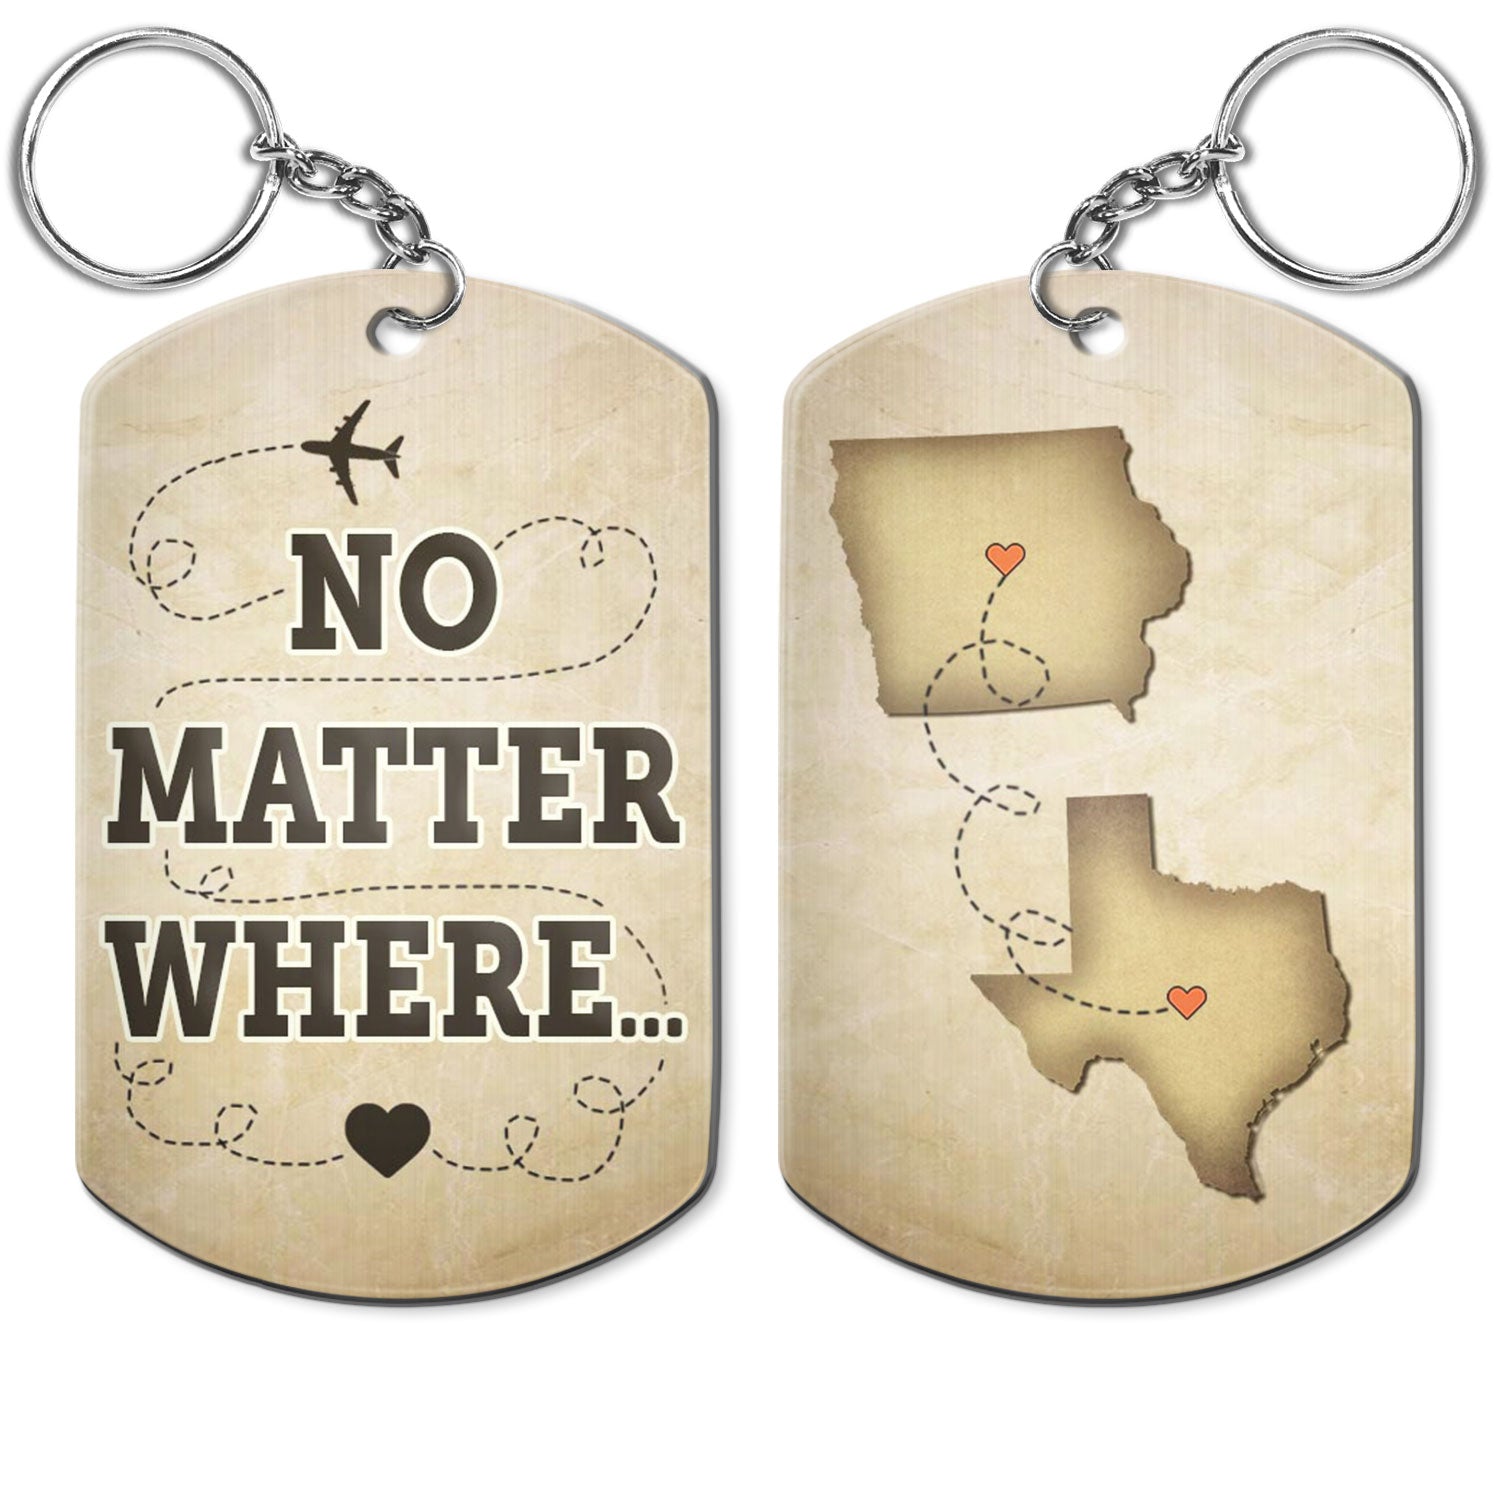 No Matter Where - Anniversary, Birthday Gifts For Couples, Siblings, Besties - Personalized Aluminum Keychain